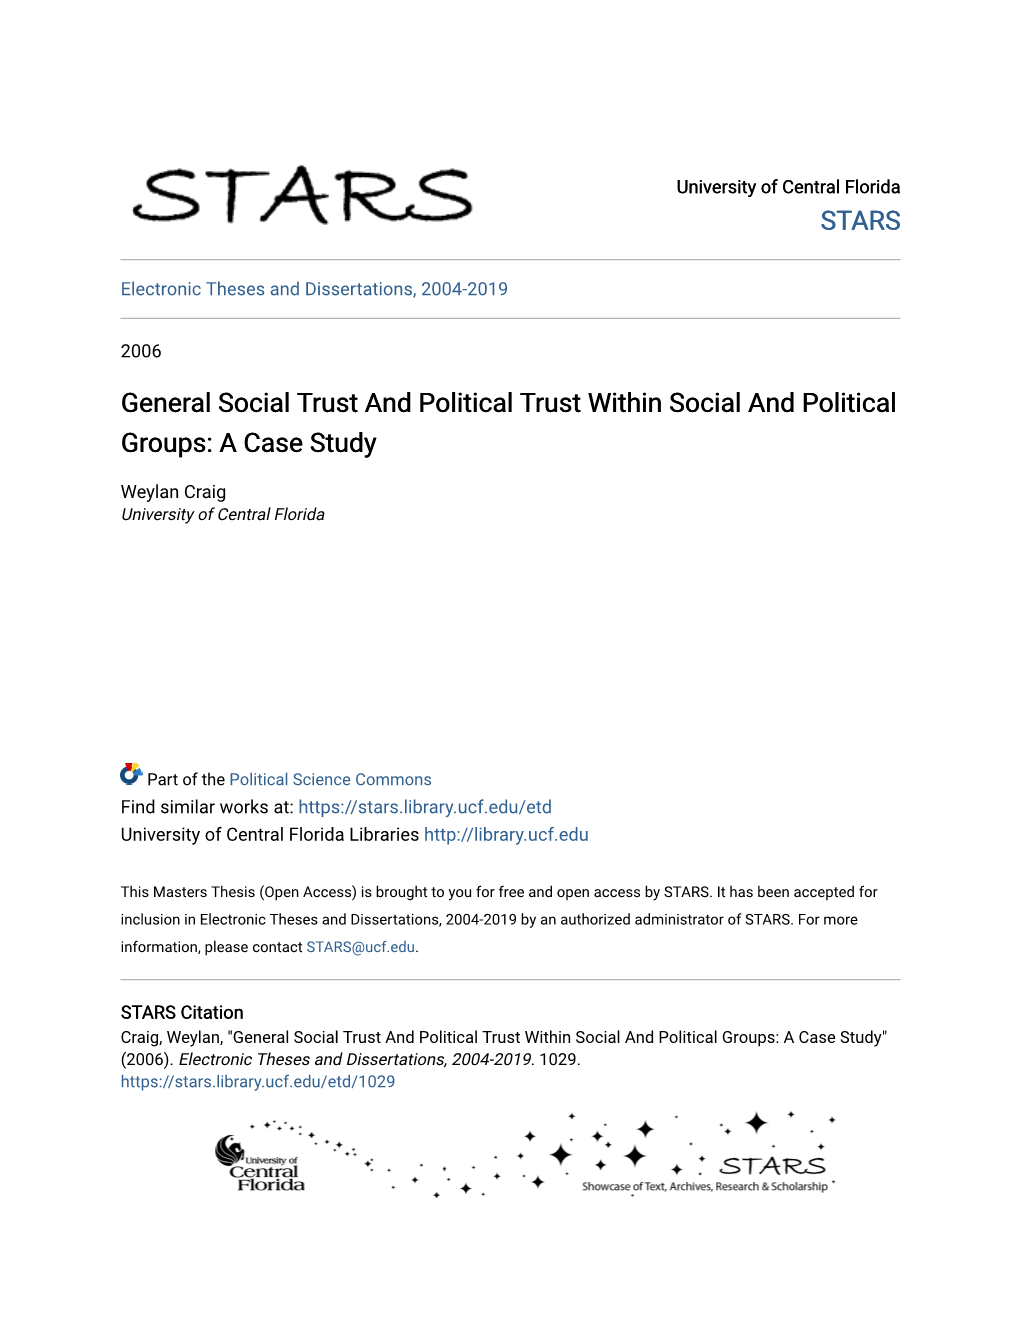 General Social Trust and Political Trust Within Social and Political Groups: a Case Study